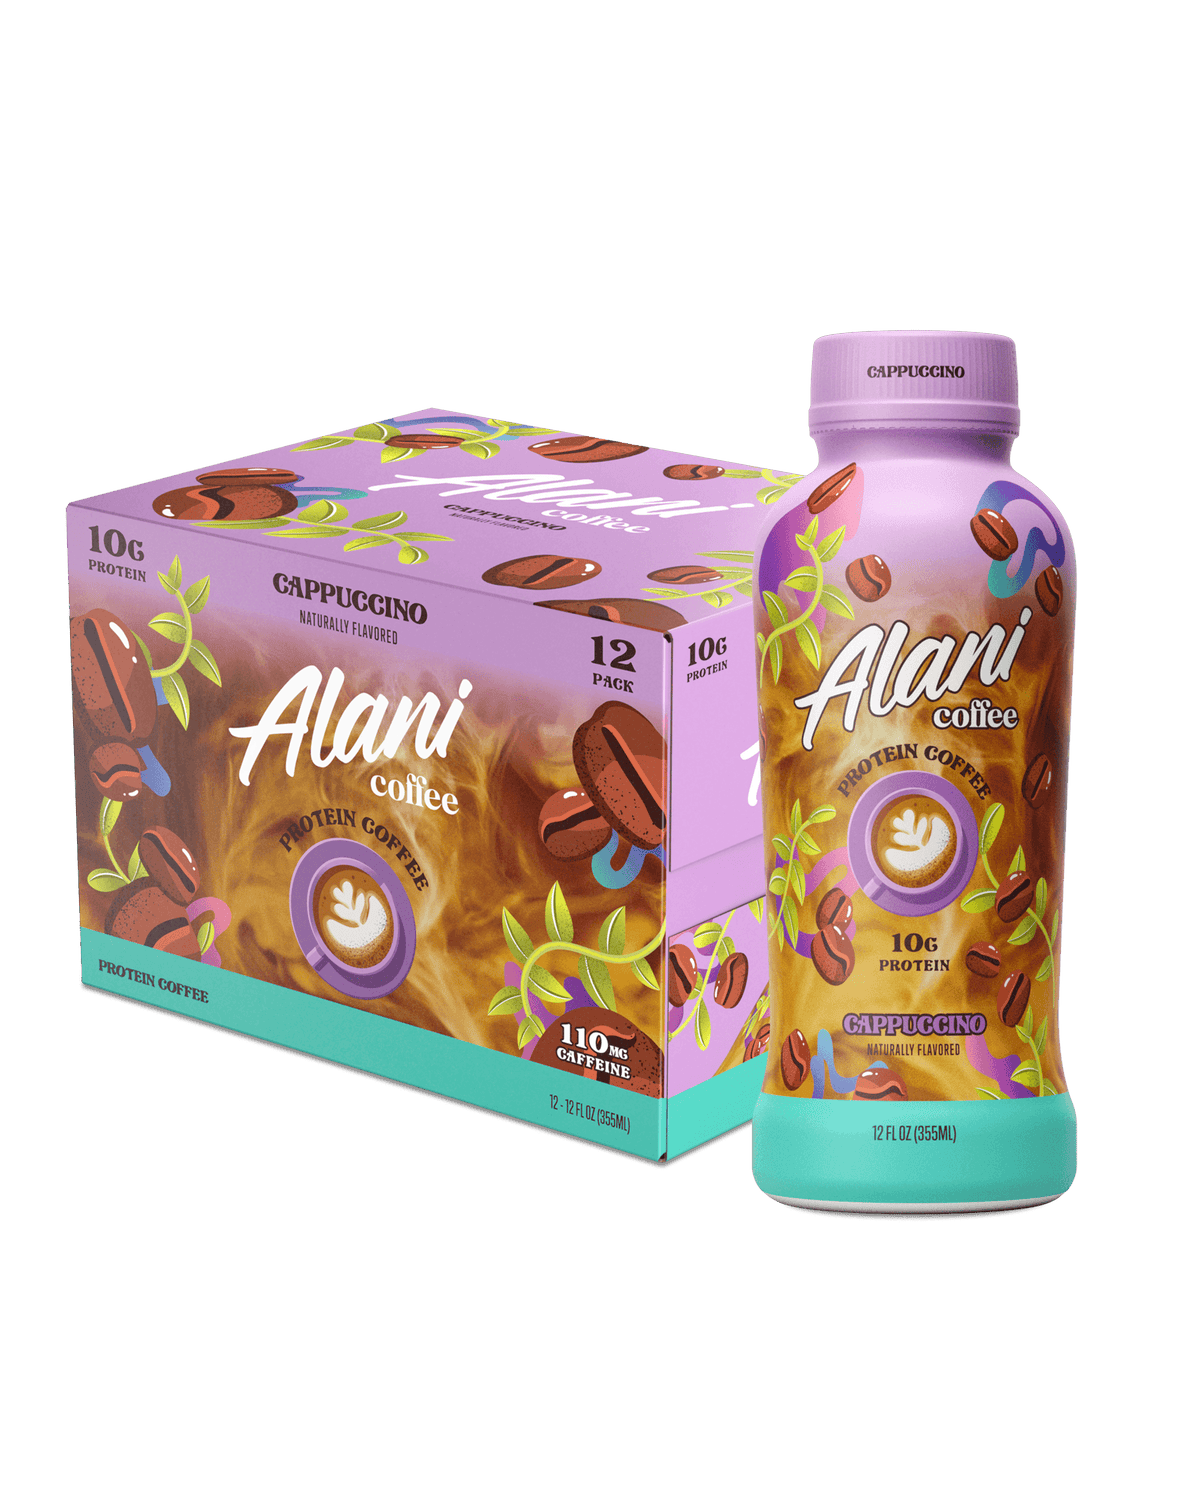 A bottle of Alani Nu Cappuccino coffee next to a 12pk box of Alani Nu Cappuccino Coffee.